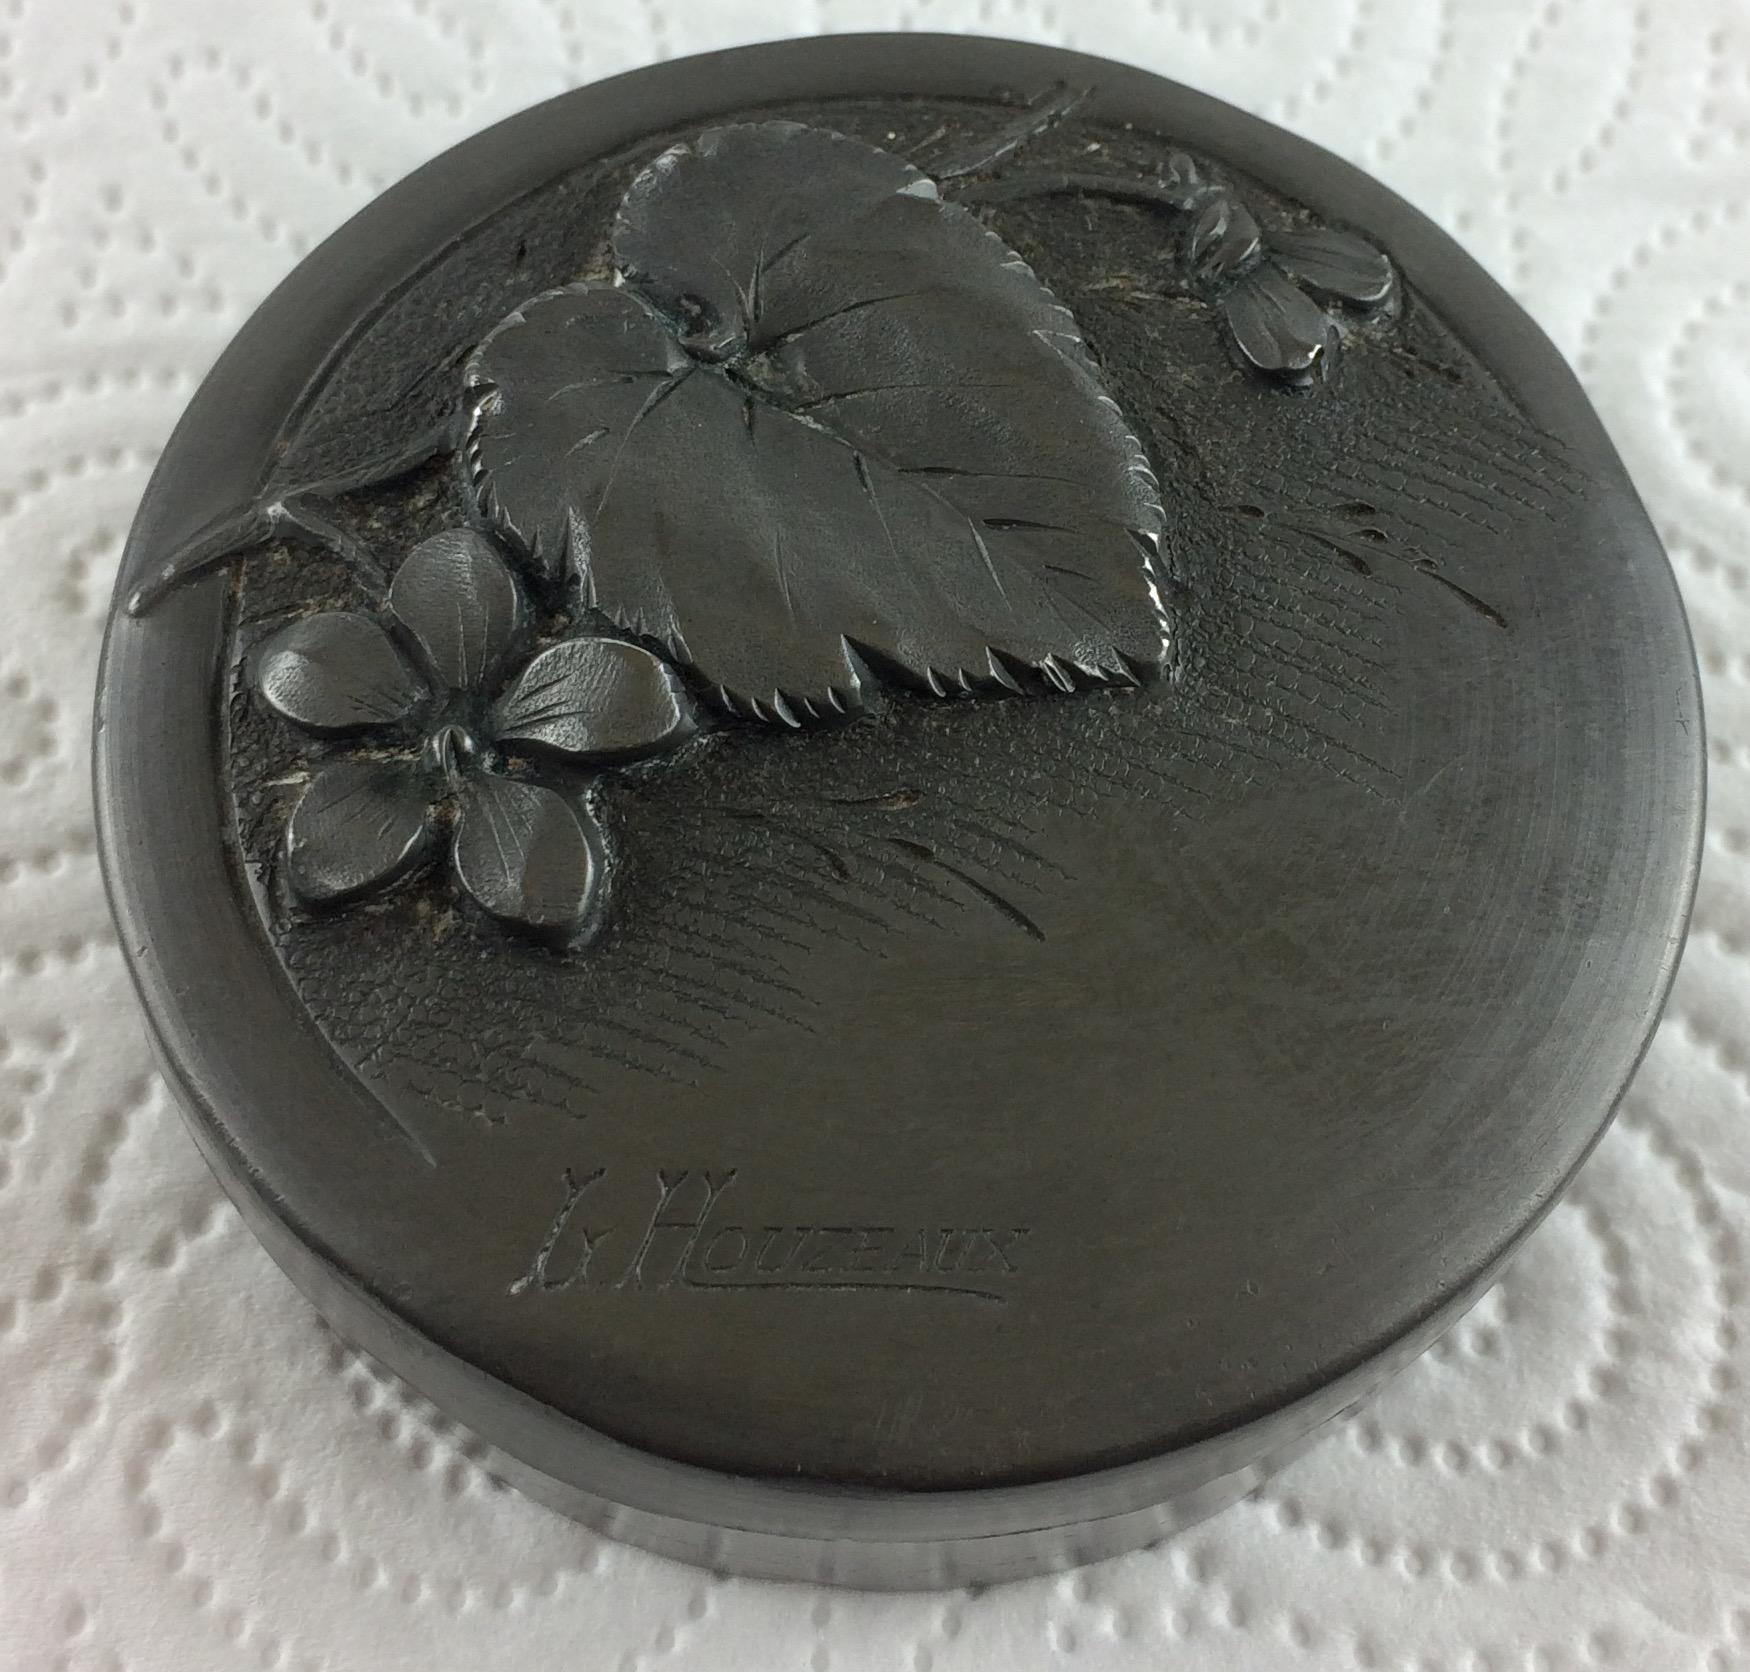 Elegant French Art Nouveau uniquely illustrated pewter covered box by Louis Houzeaux. Generously sized handwrought with typical Art Nouveau floral embossed design. Engraved signature on top and also stamped on the underside from the famous 